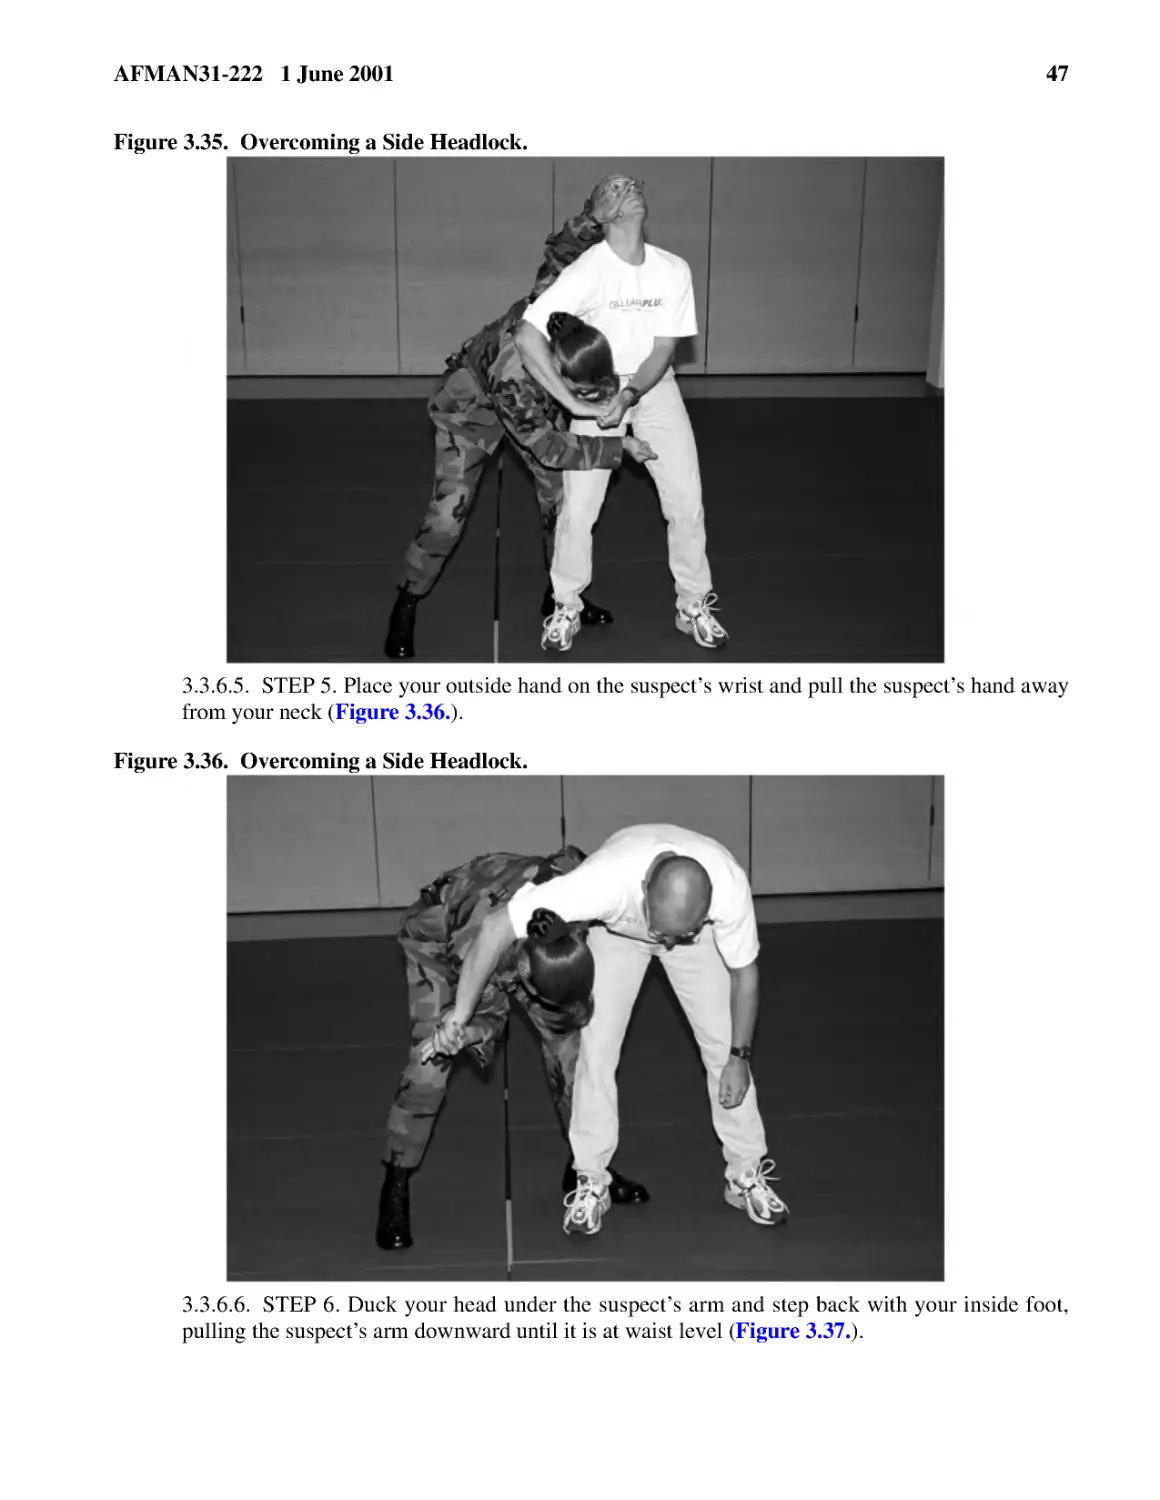 Figure 3.35.� Overcoming a Side Headlock.
3.3.6.5.� STEP 5. Place your outside hand on the suspect’s wrist and pull the suspect’s hand away...
3.3.6.6.� STEP 6. Duck your head under the suspect’s arm and step back with your inside foot, pul...